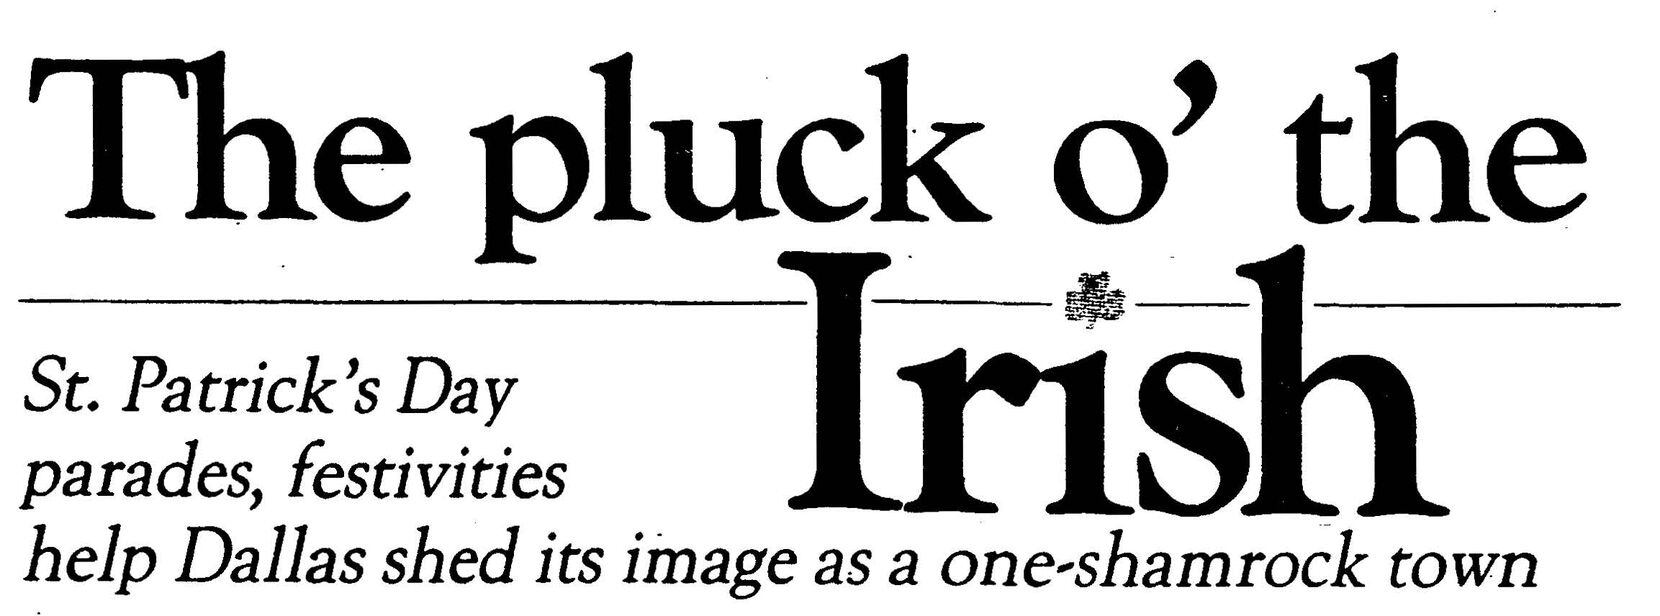 Headline from The Dallas Morning News on March 17, 1983.